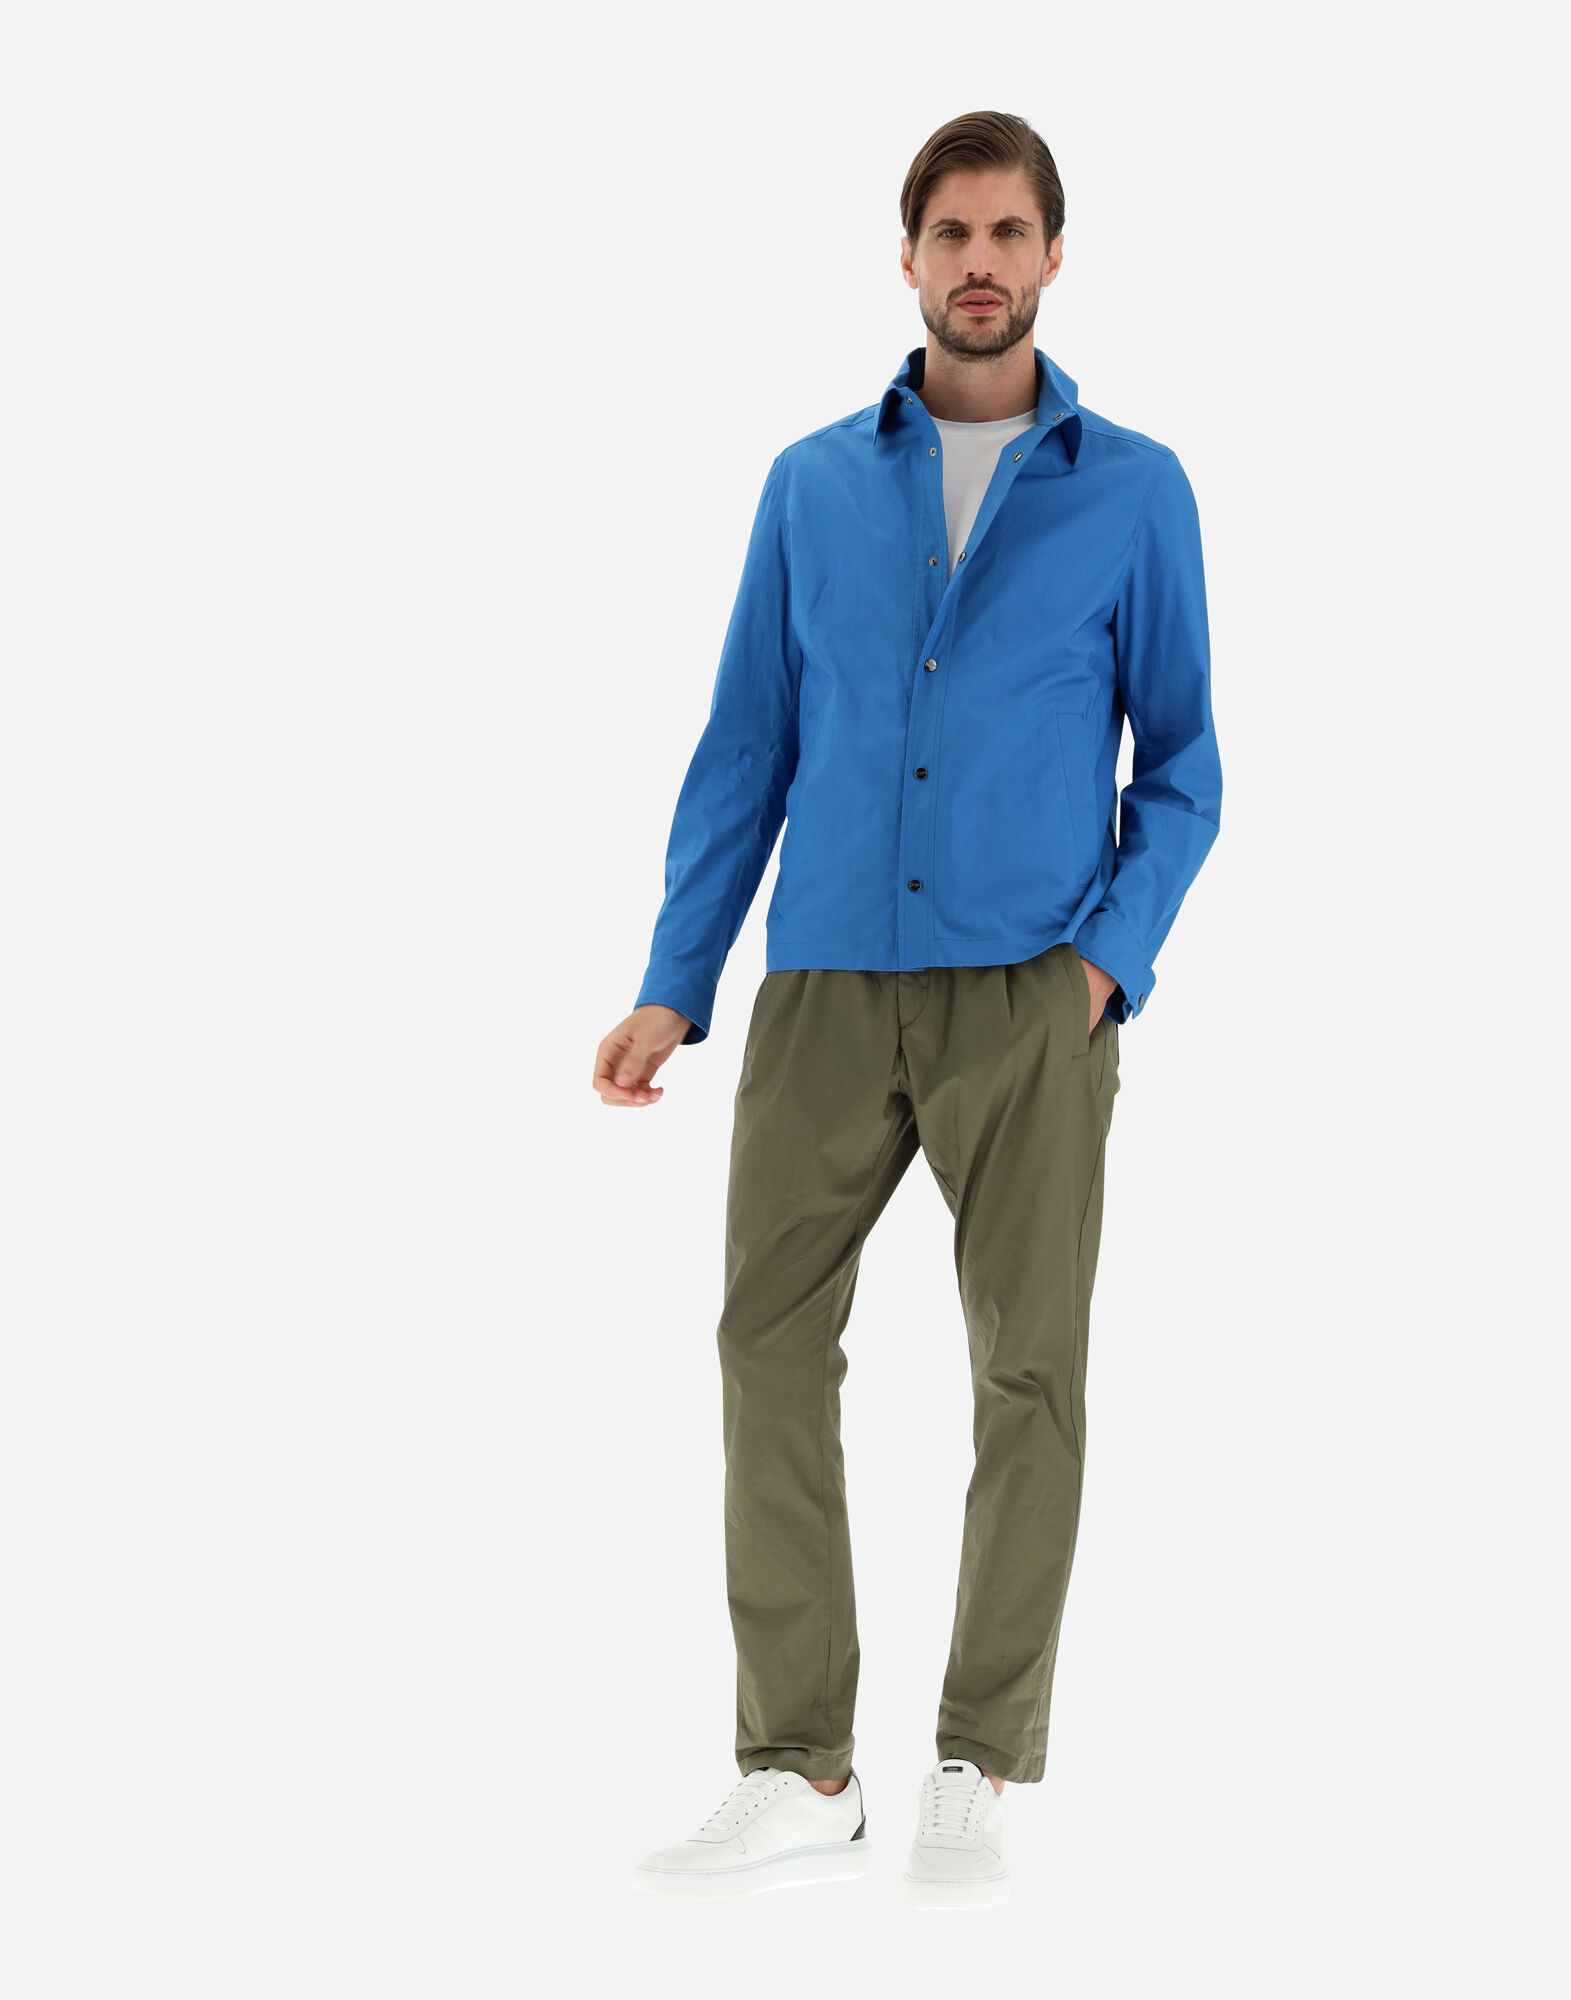 FIELD JACKET IN LIGHT COTTON STRETCH in Turquoise for Men | Herno®